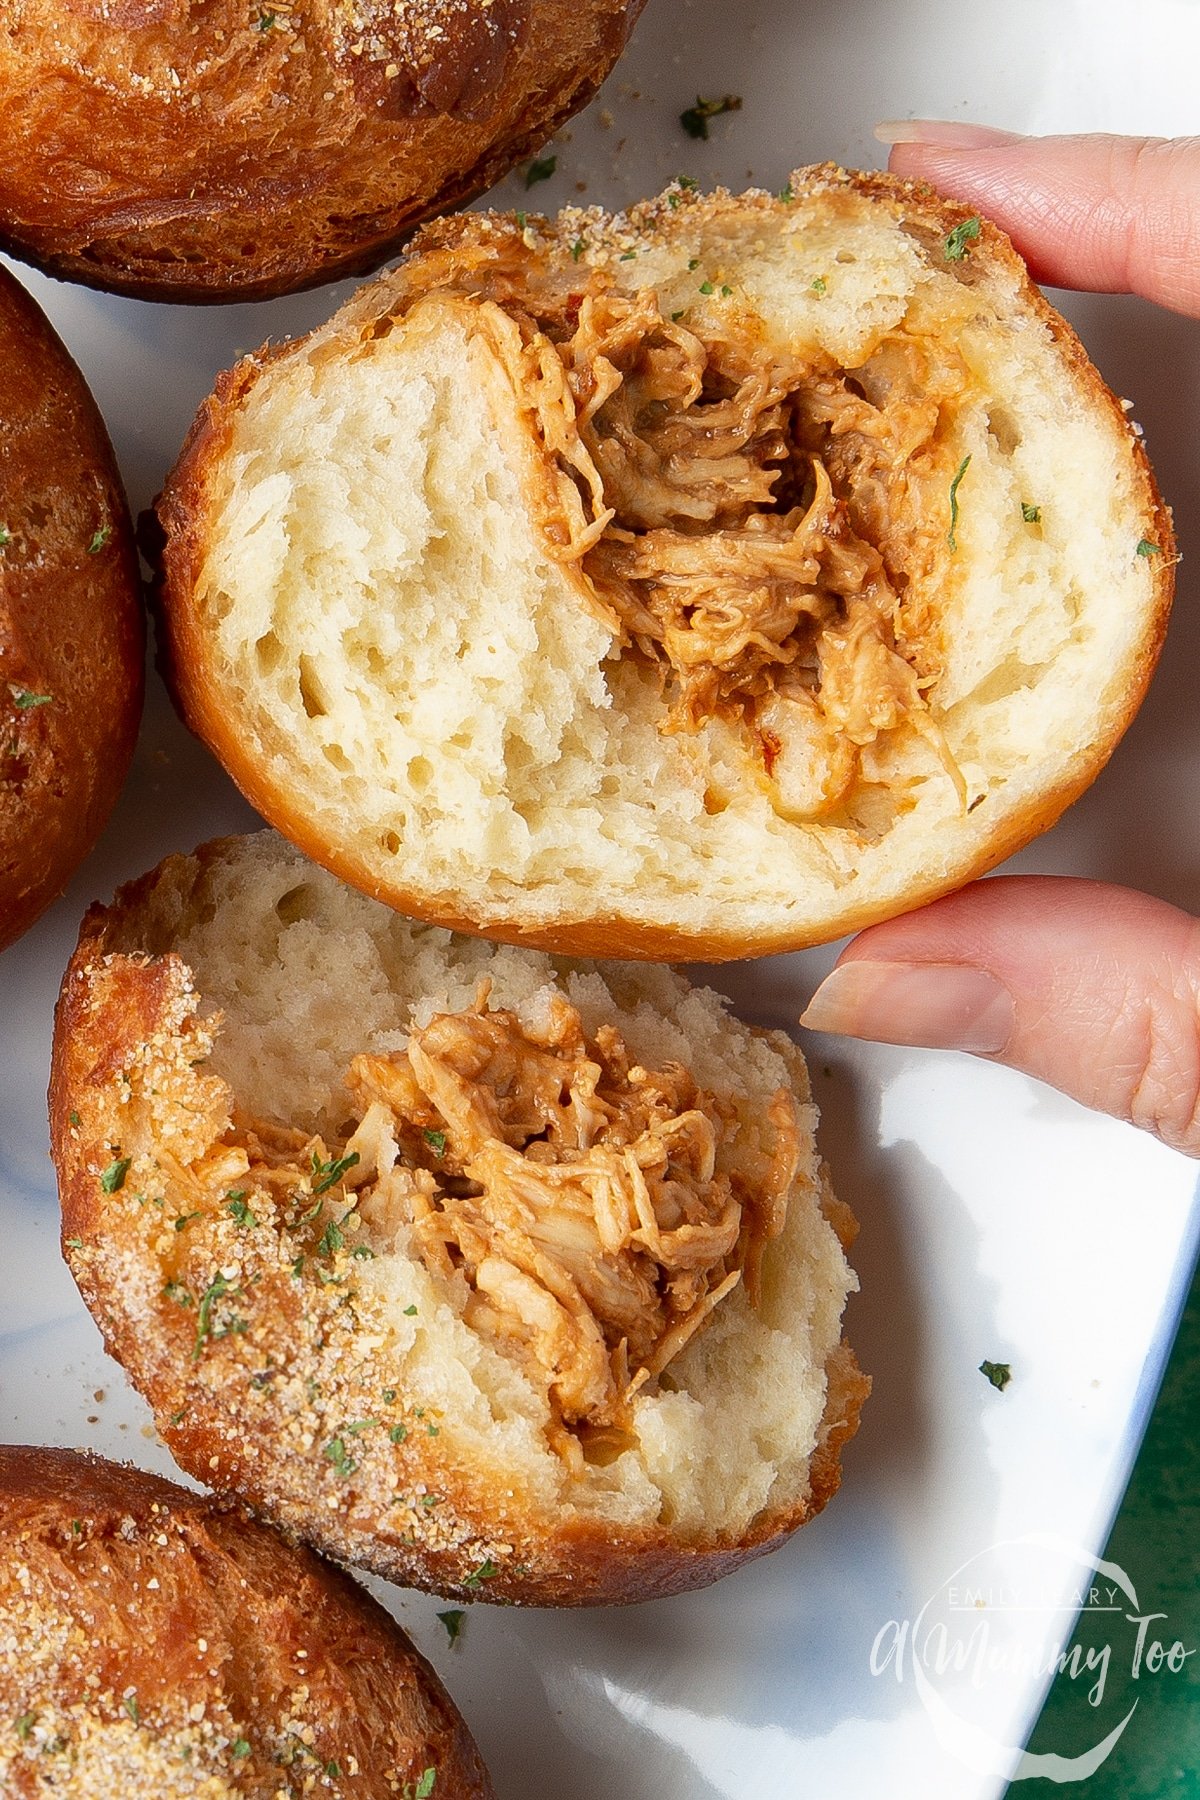 Close up of a torn open pulled chicken doughnut. A hand reaches for it.